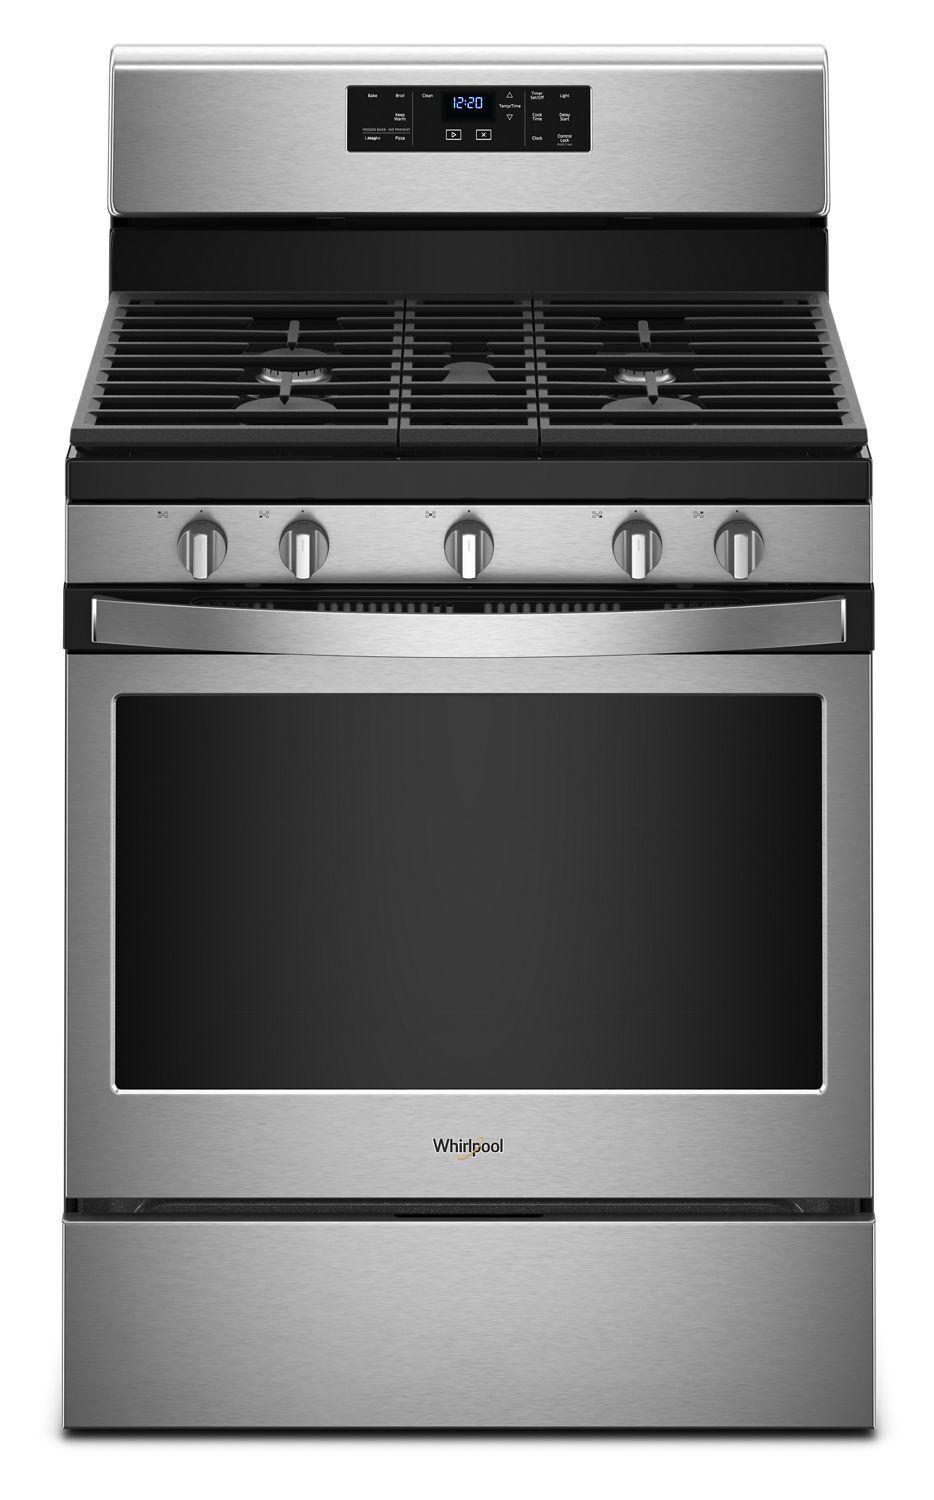 5.0 cu. ft. Freestanding Gas Range with Center Oval Burner Black-on-Stainless